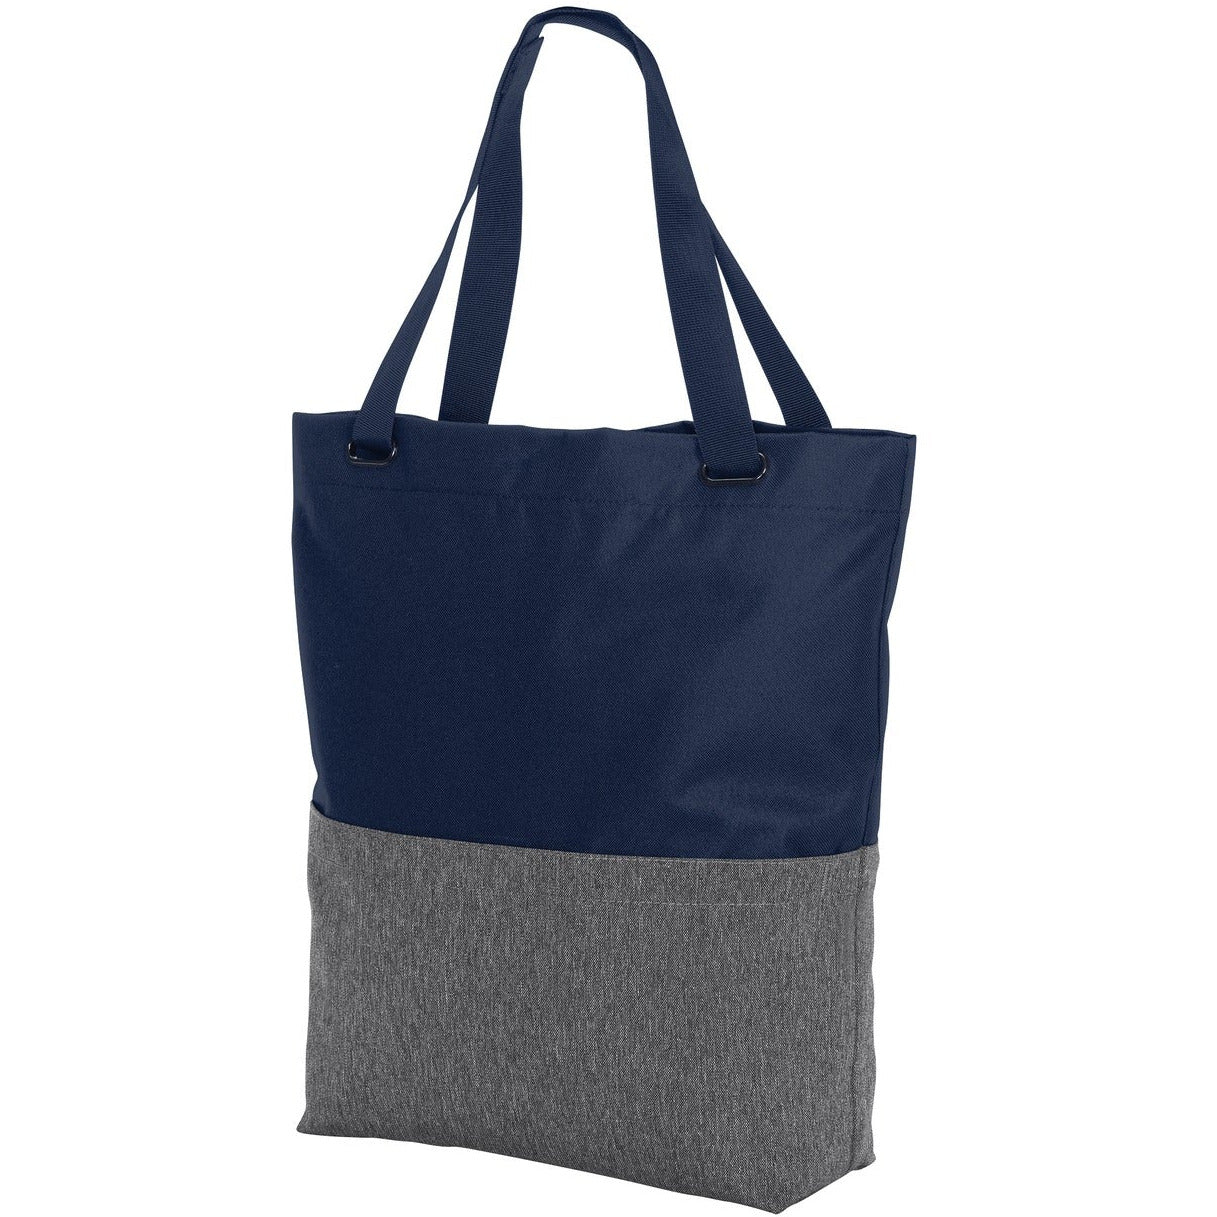 Standard Tote Bag:  Port Authority Access Convertible